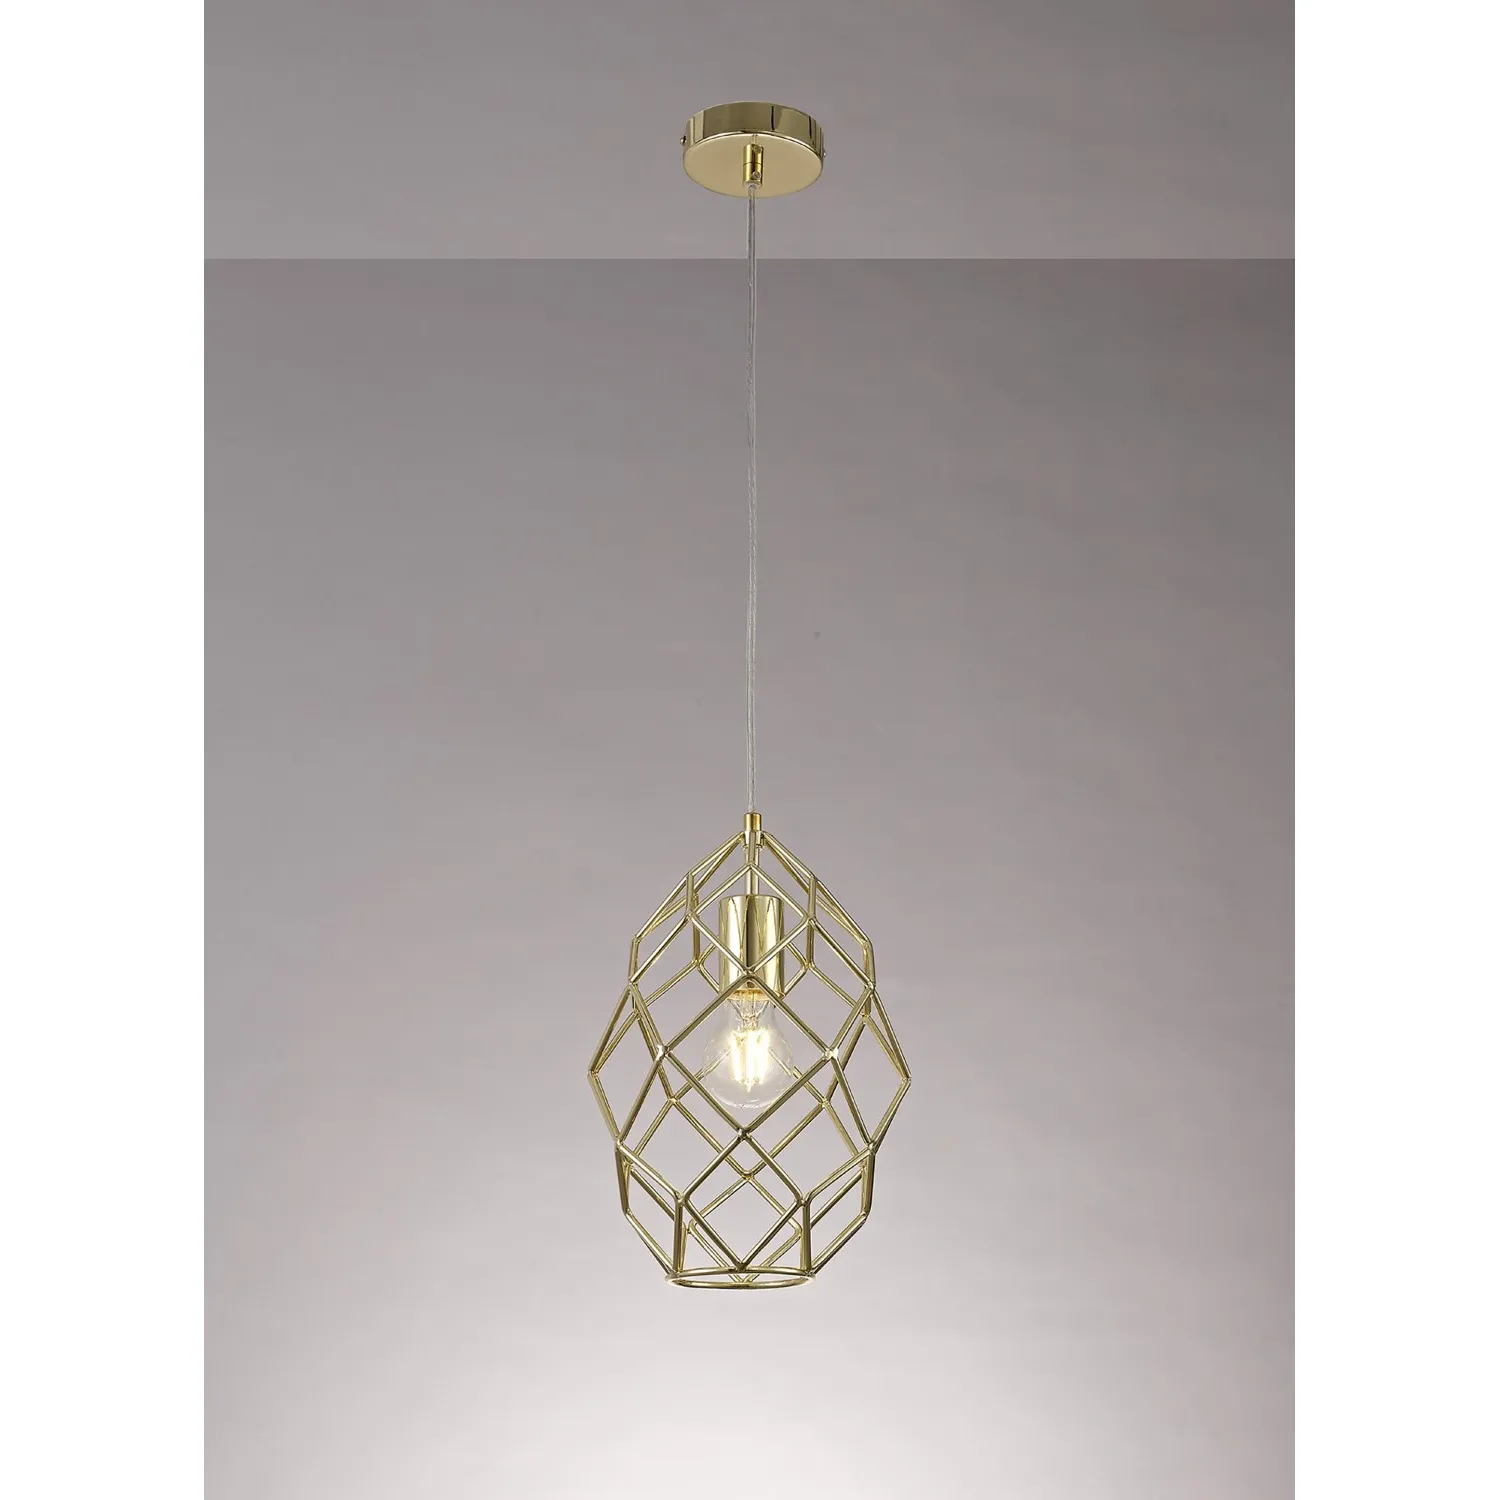 Bloomsbury Curved Cylinder Pendant, 1 x E27, Polished Brass